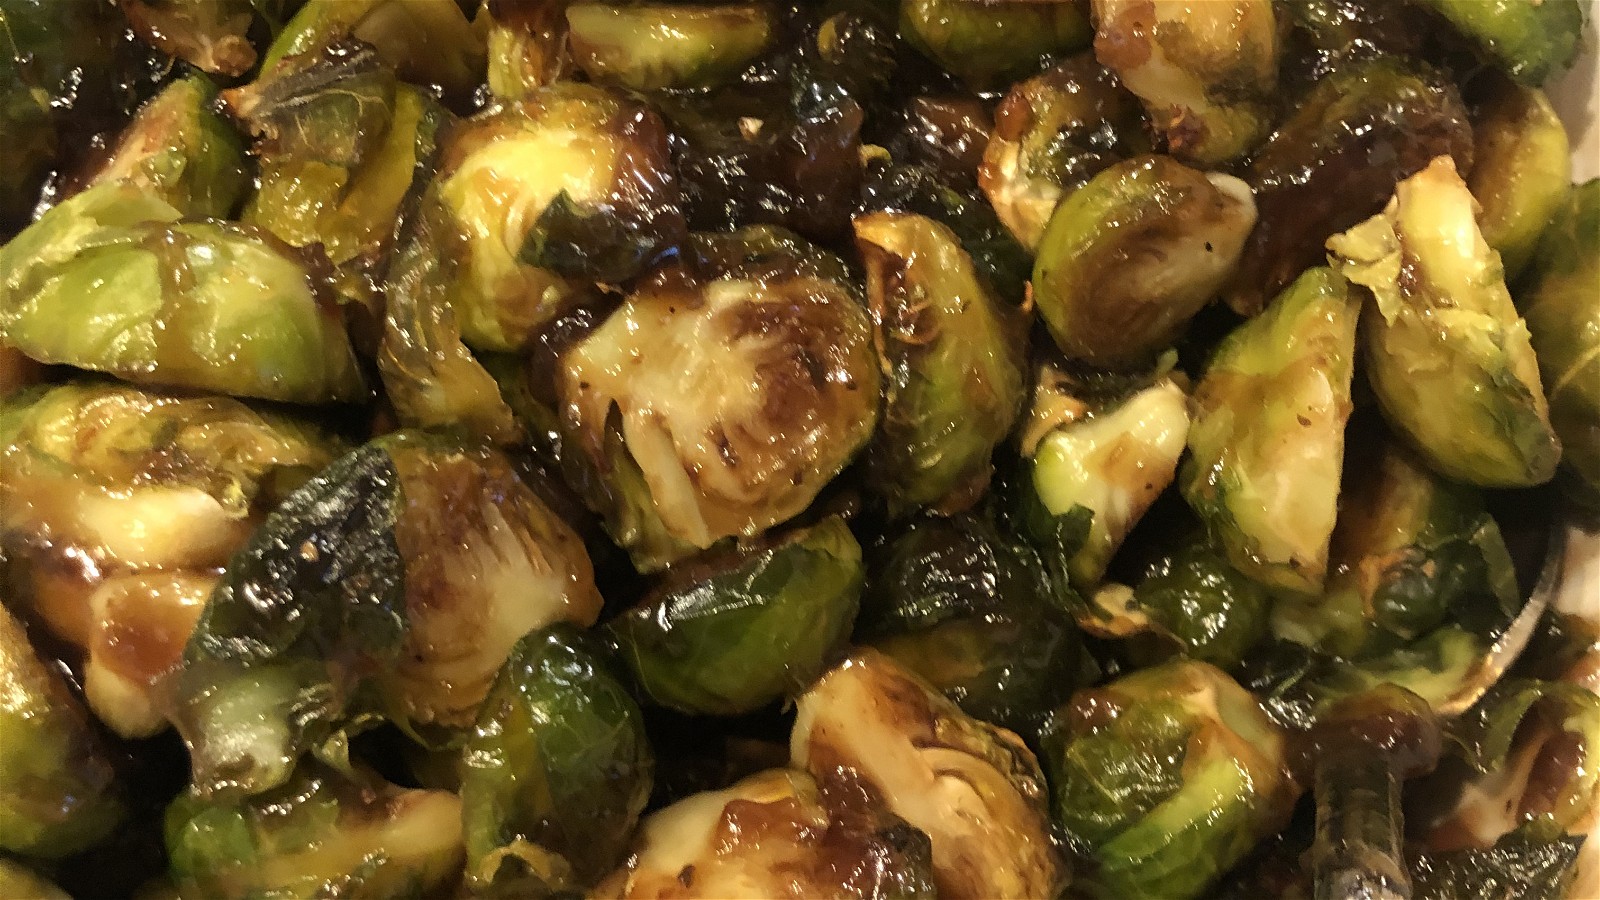 Image of Garlic Roasted Brussels Sprouts with Onion Balsamic